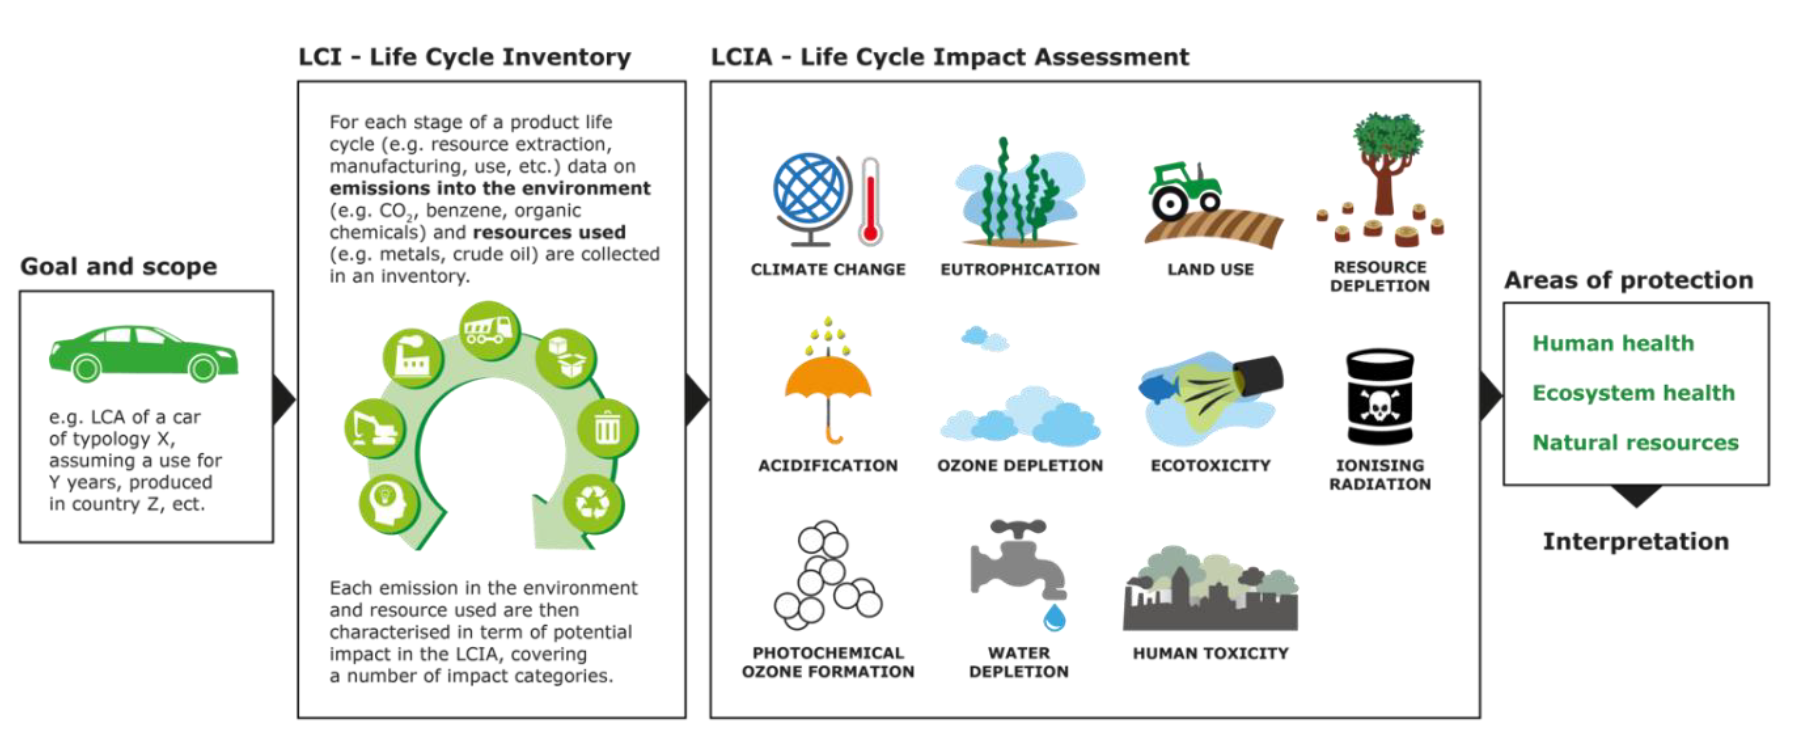 Measuring Carbon Footprints - Scope 1 Emissions explained. - Ecochain - LCA  software company